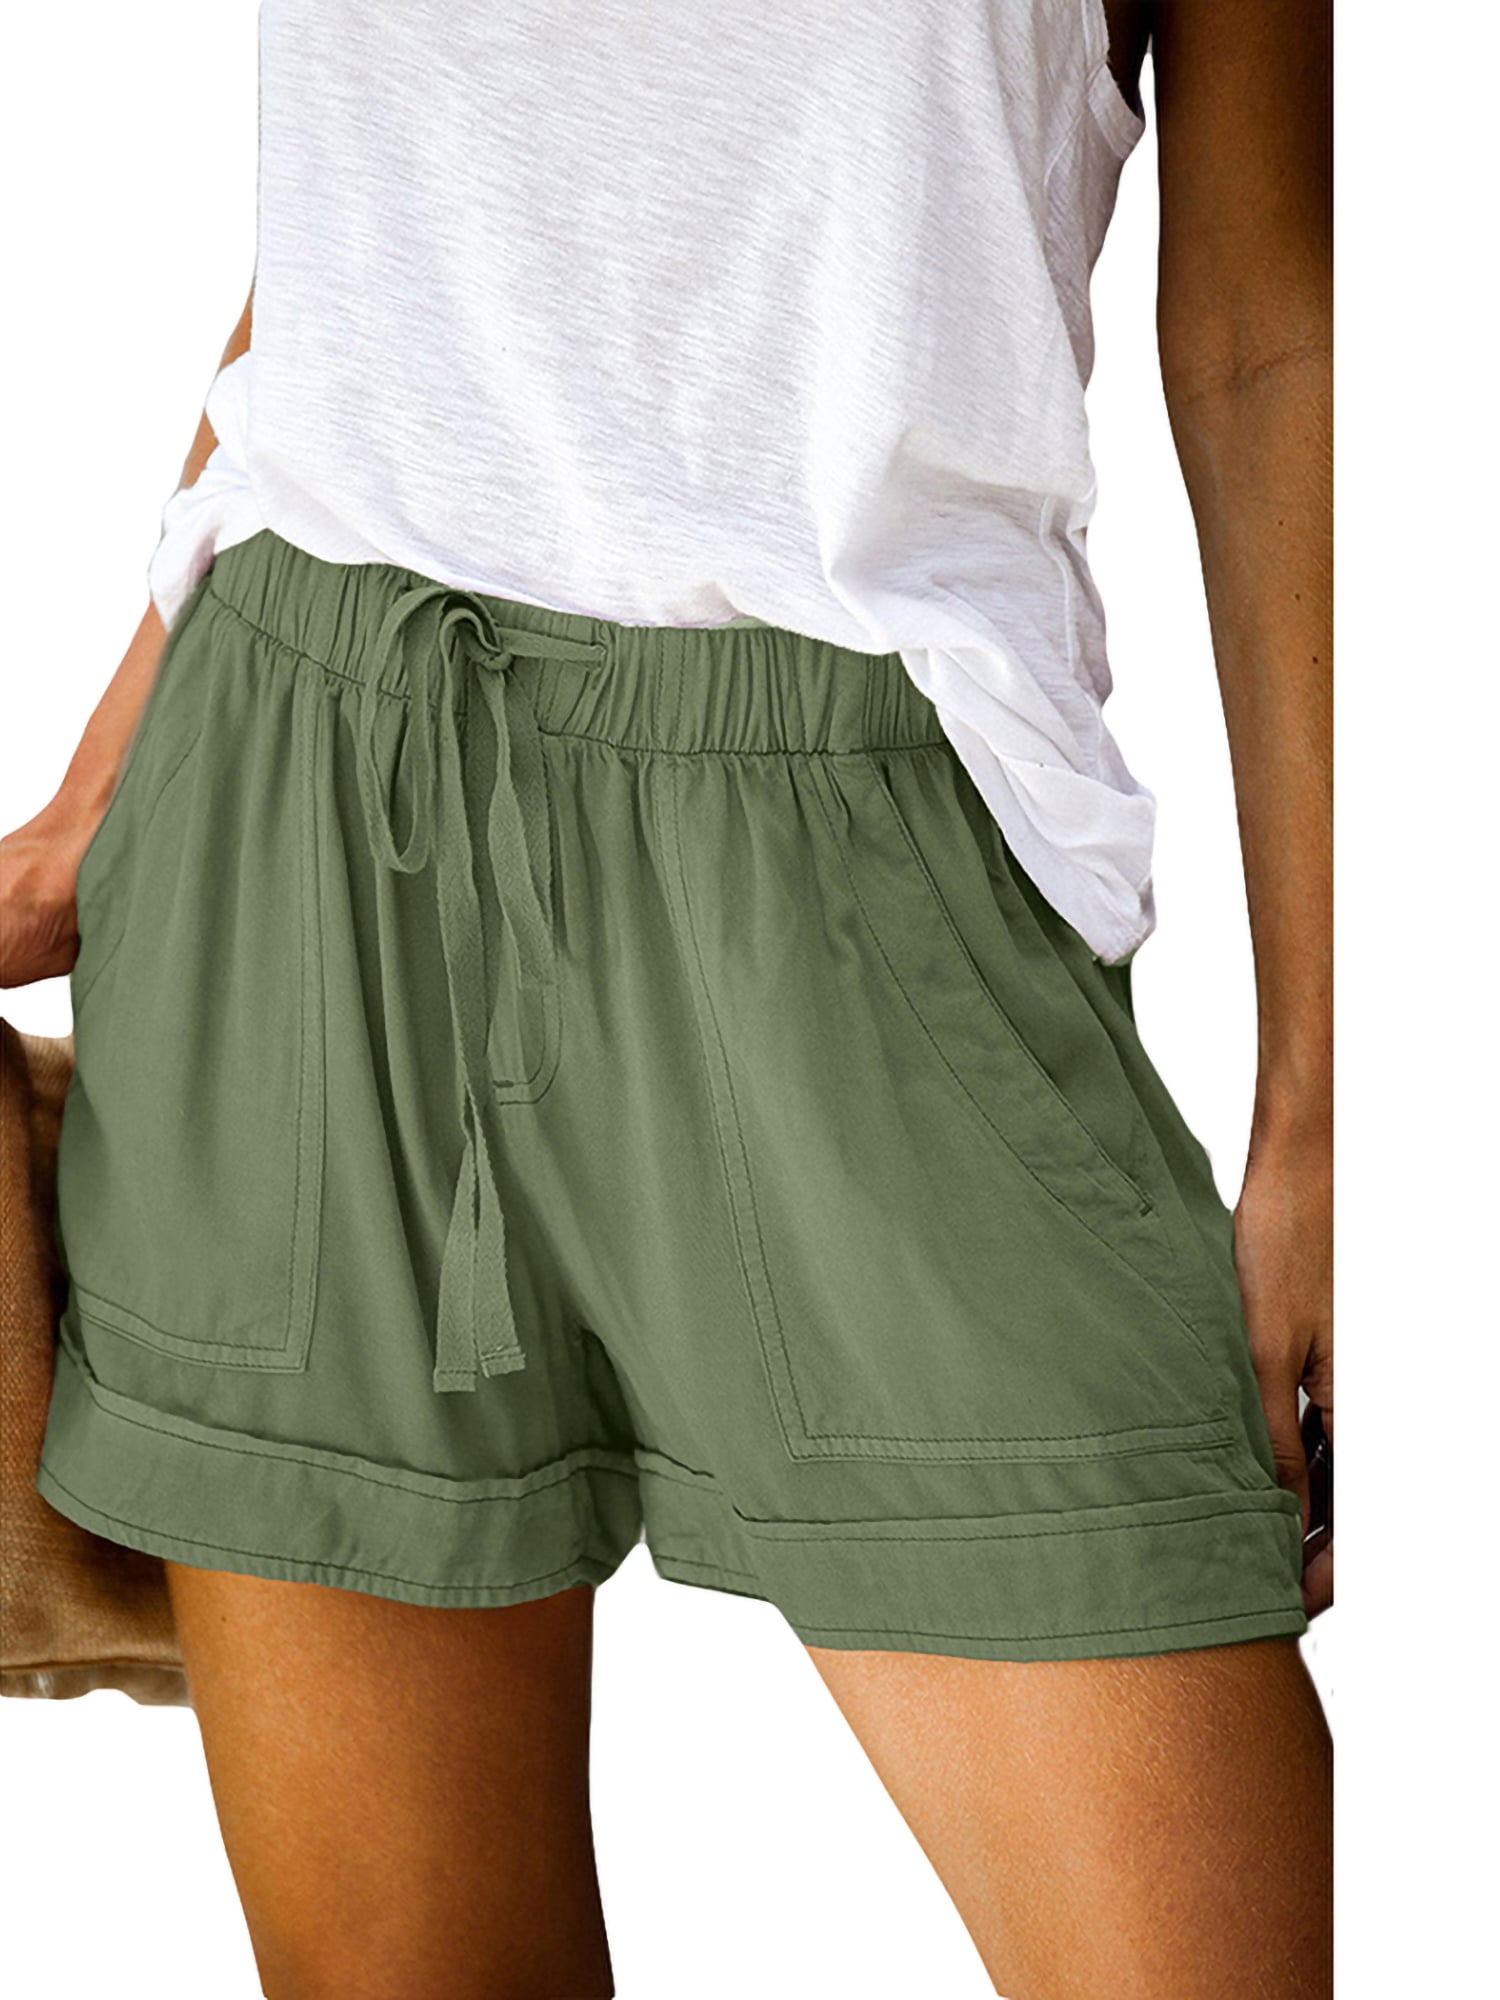 Meikosks Womens Summer Loose Hot Pants Plus Size Shorts with Pockets Lady Casual Bottoms Pants